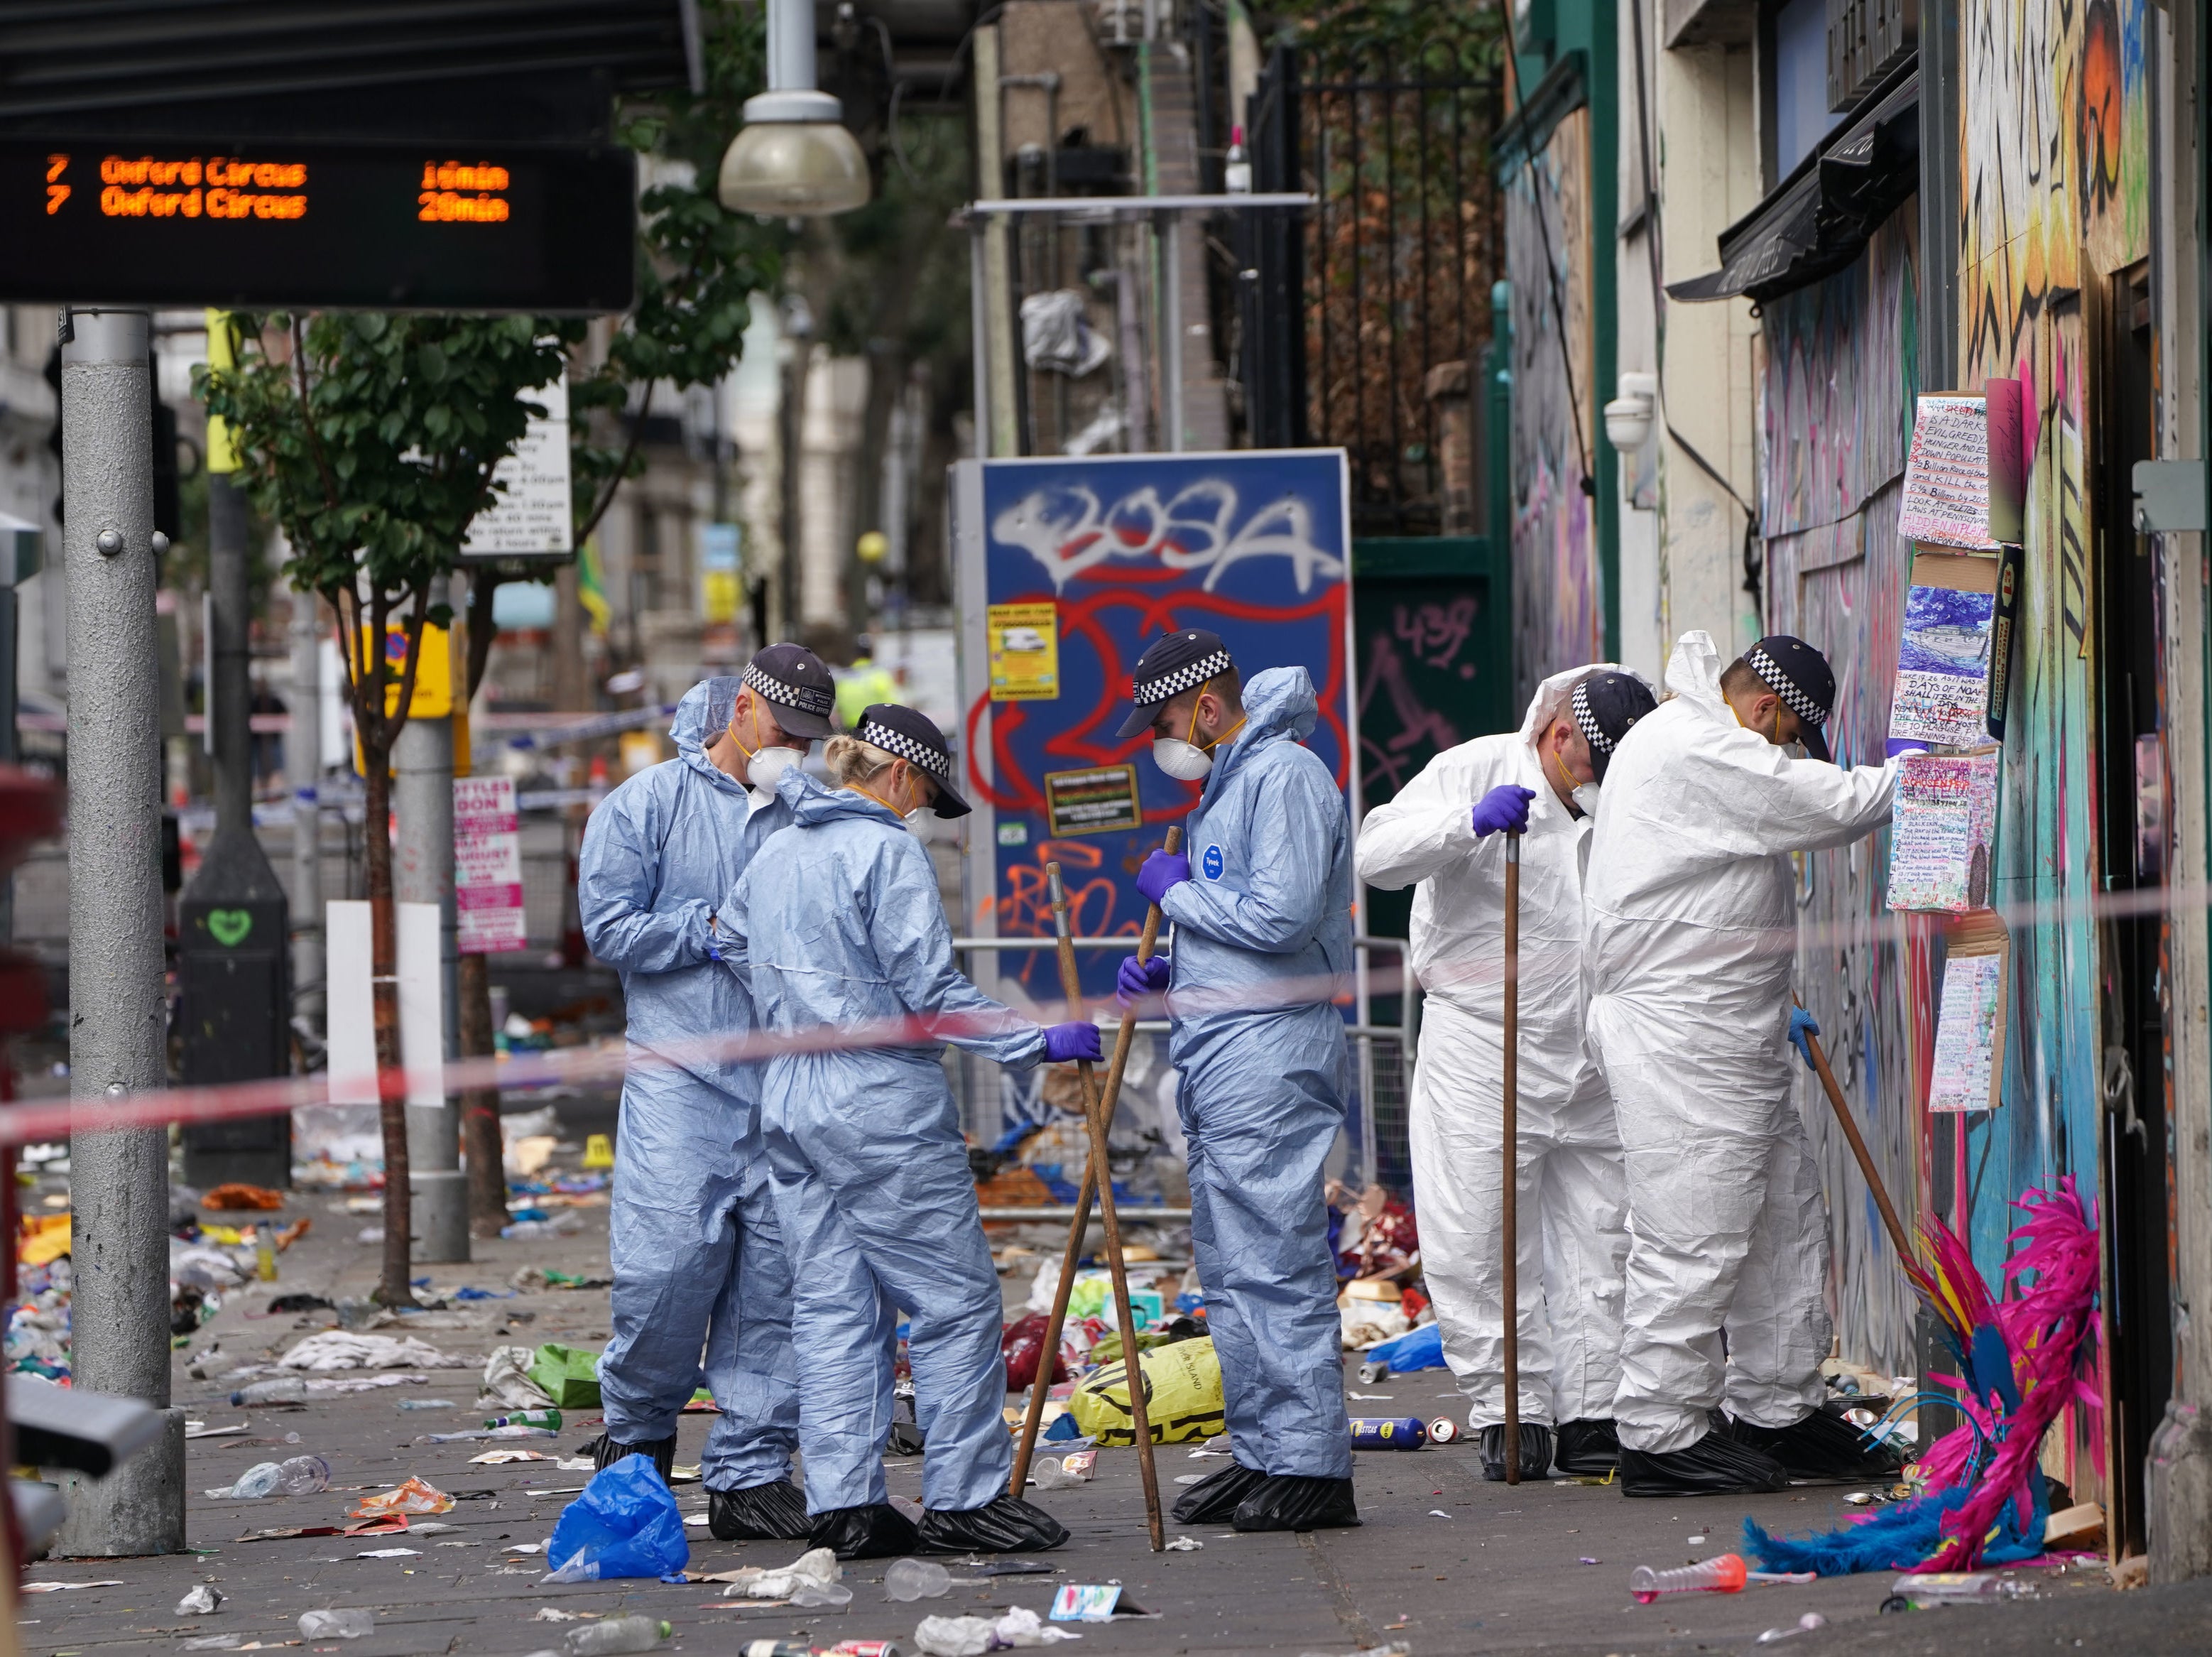 Forensic officers comb the scene in Ladbroke Grove, west London, after the rapper was stabbed